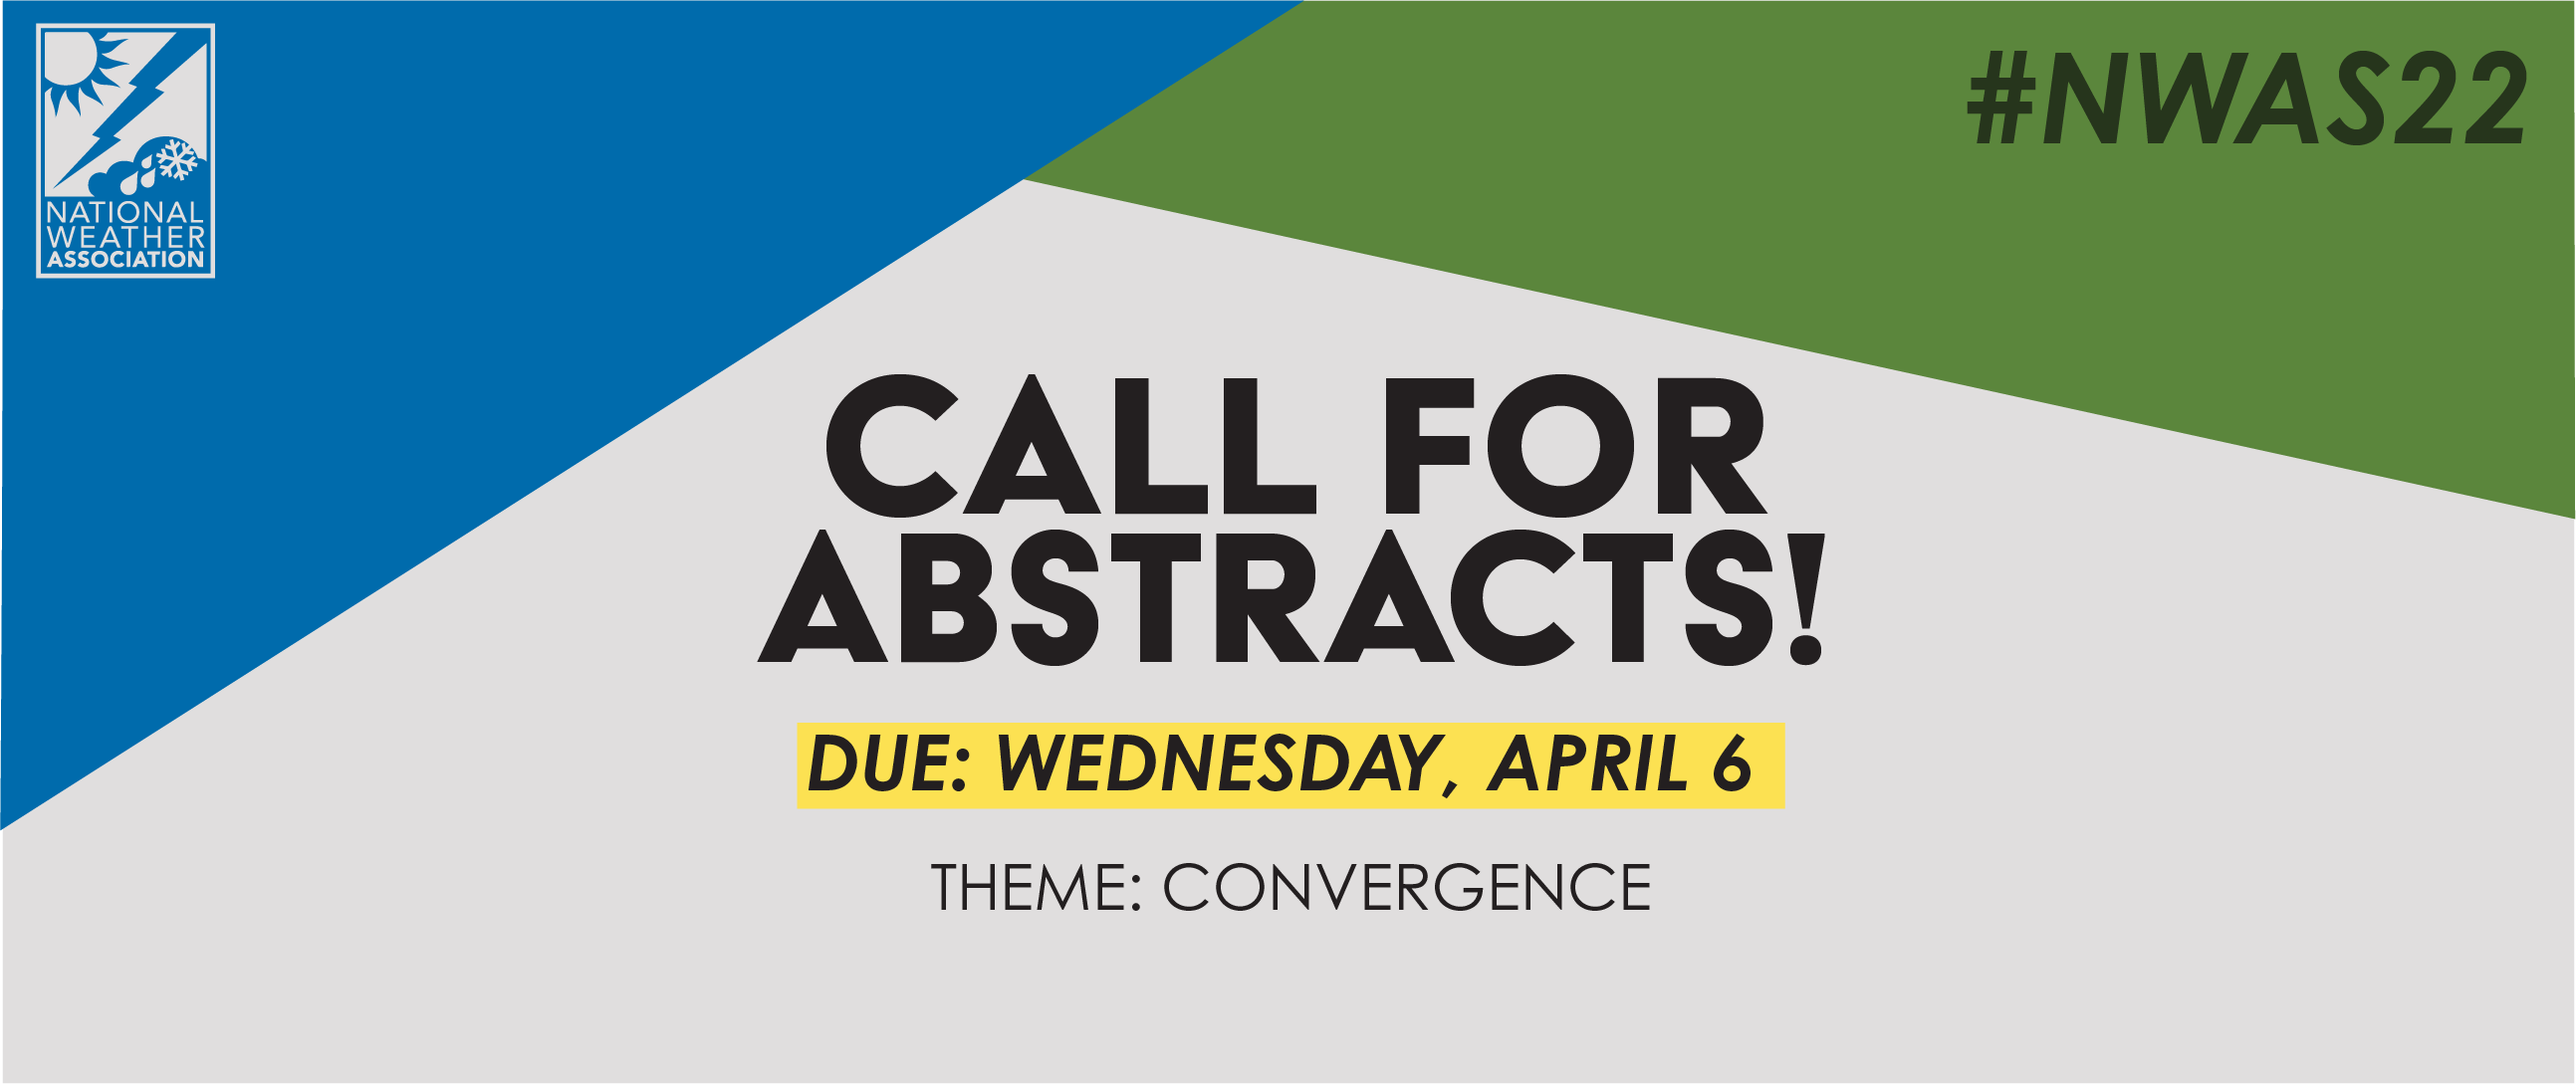 Call for Abstracts Open! Theme: Convergence. Deadline: Wednesday, April 6, 2022. 